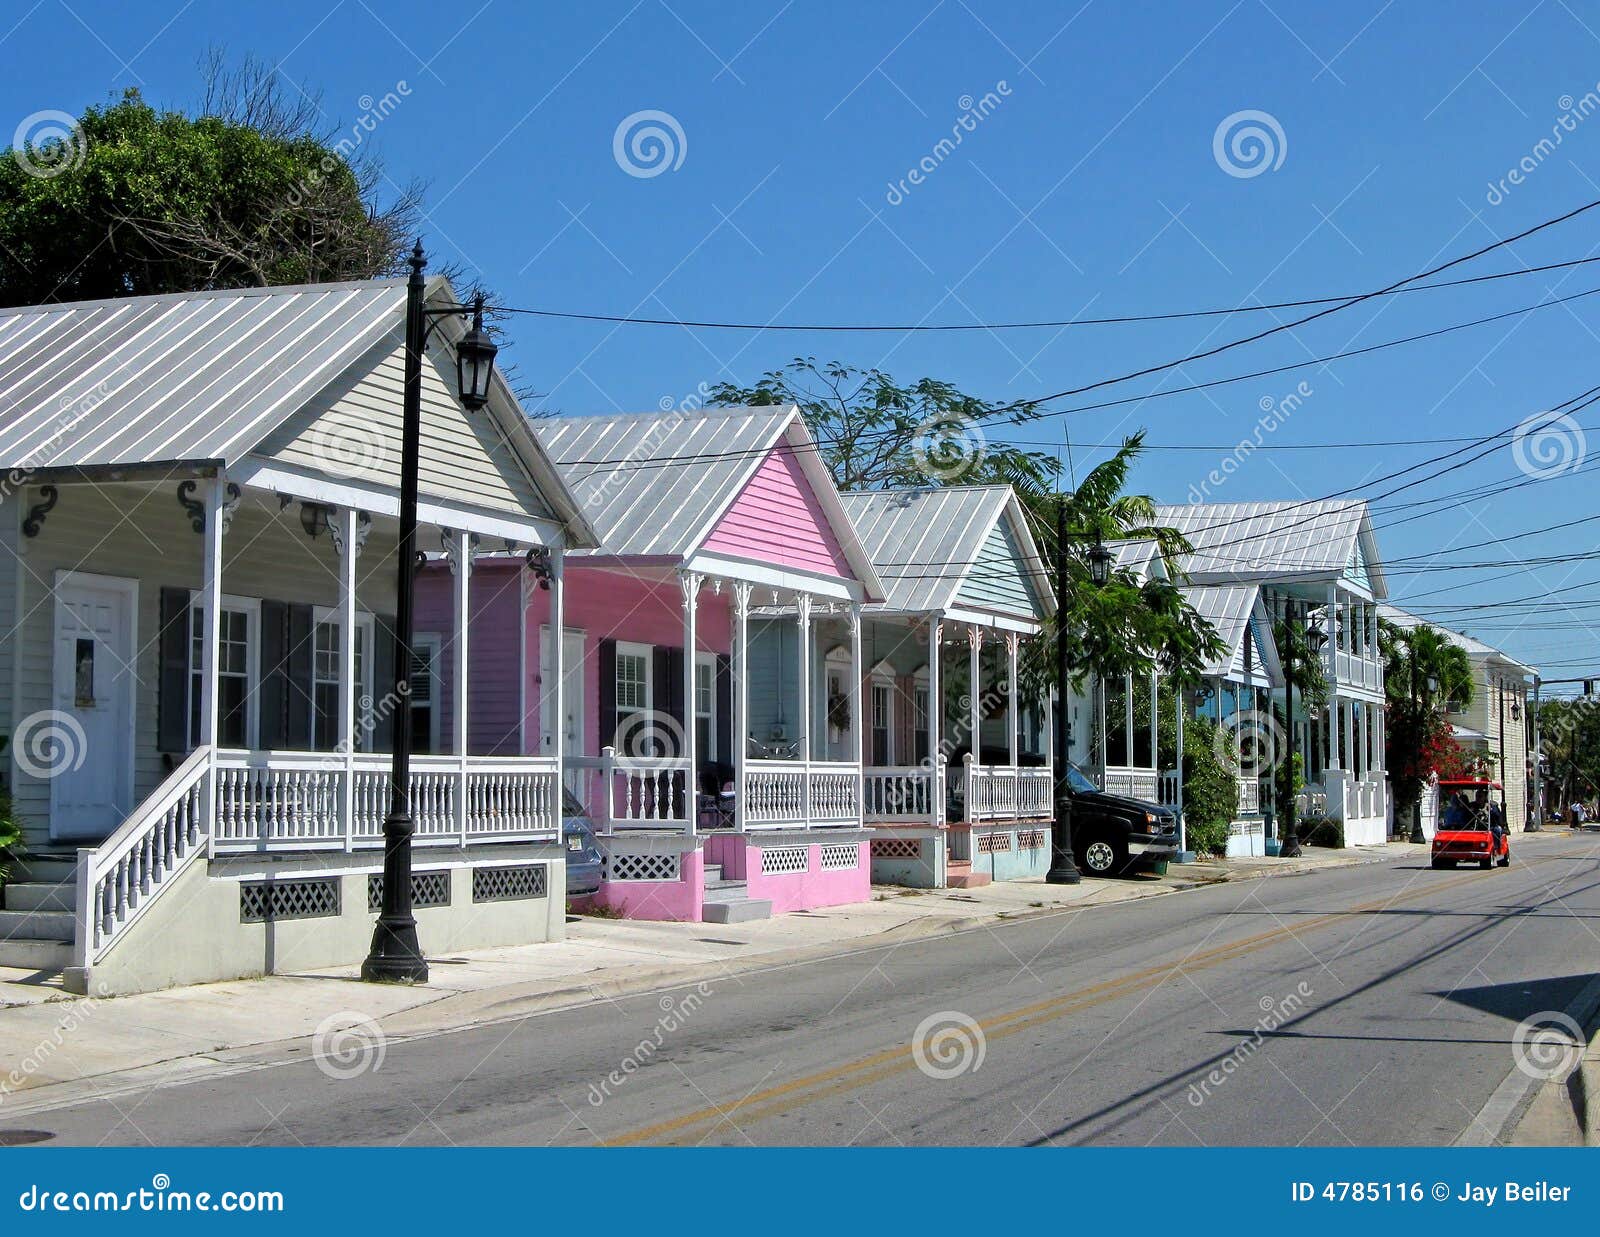 conch houses, key west